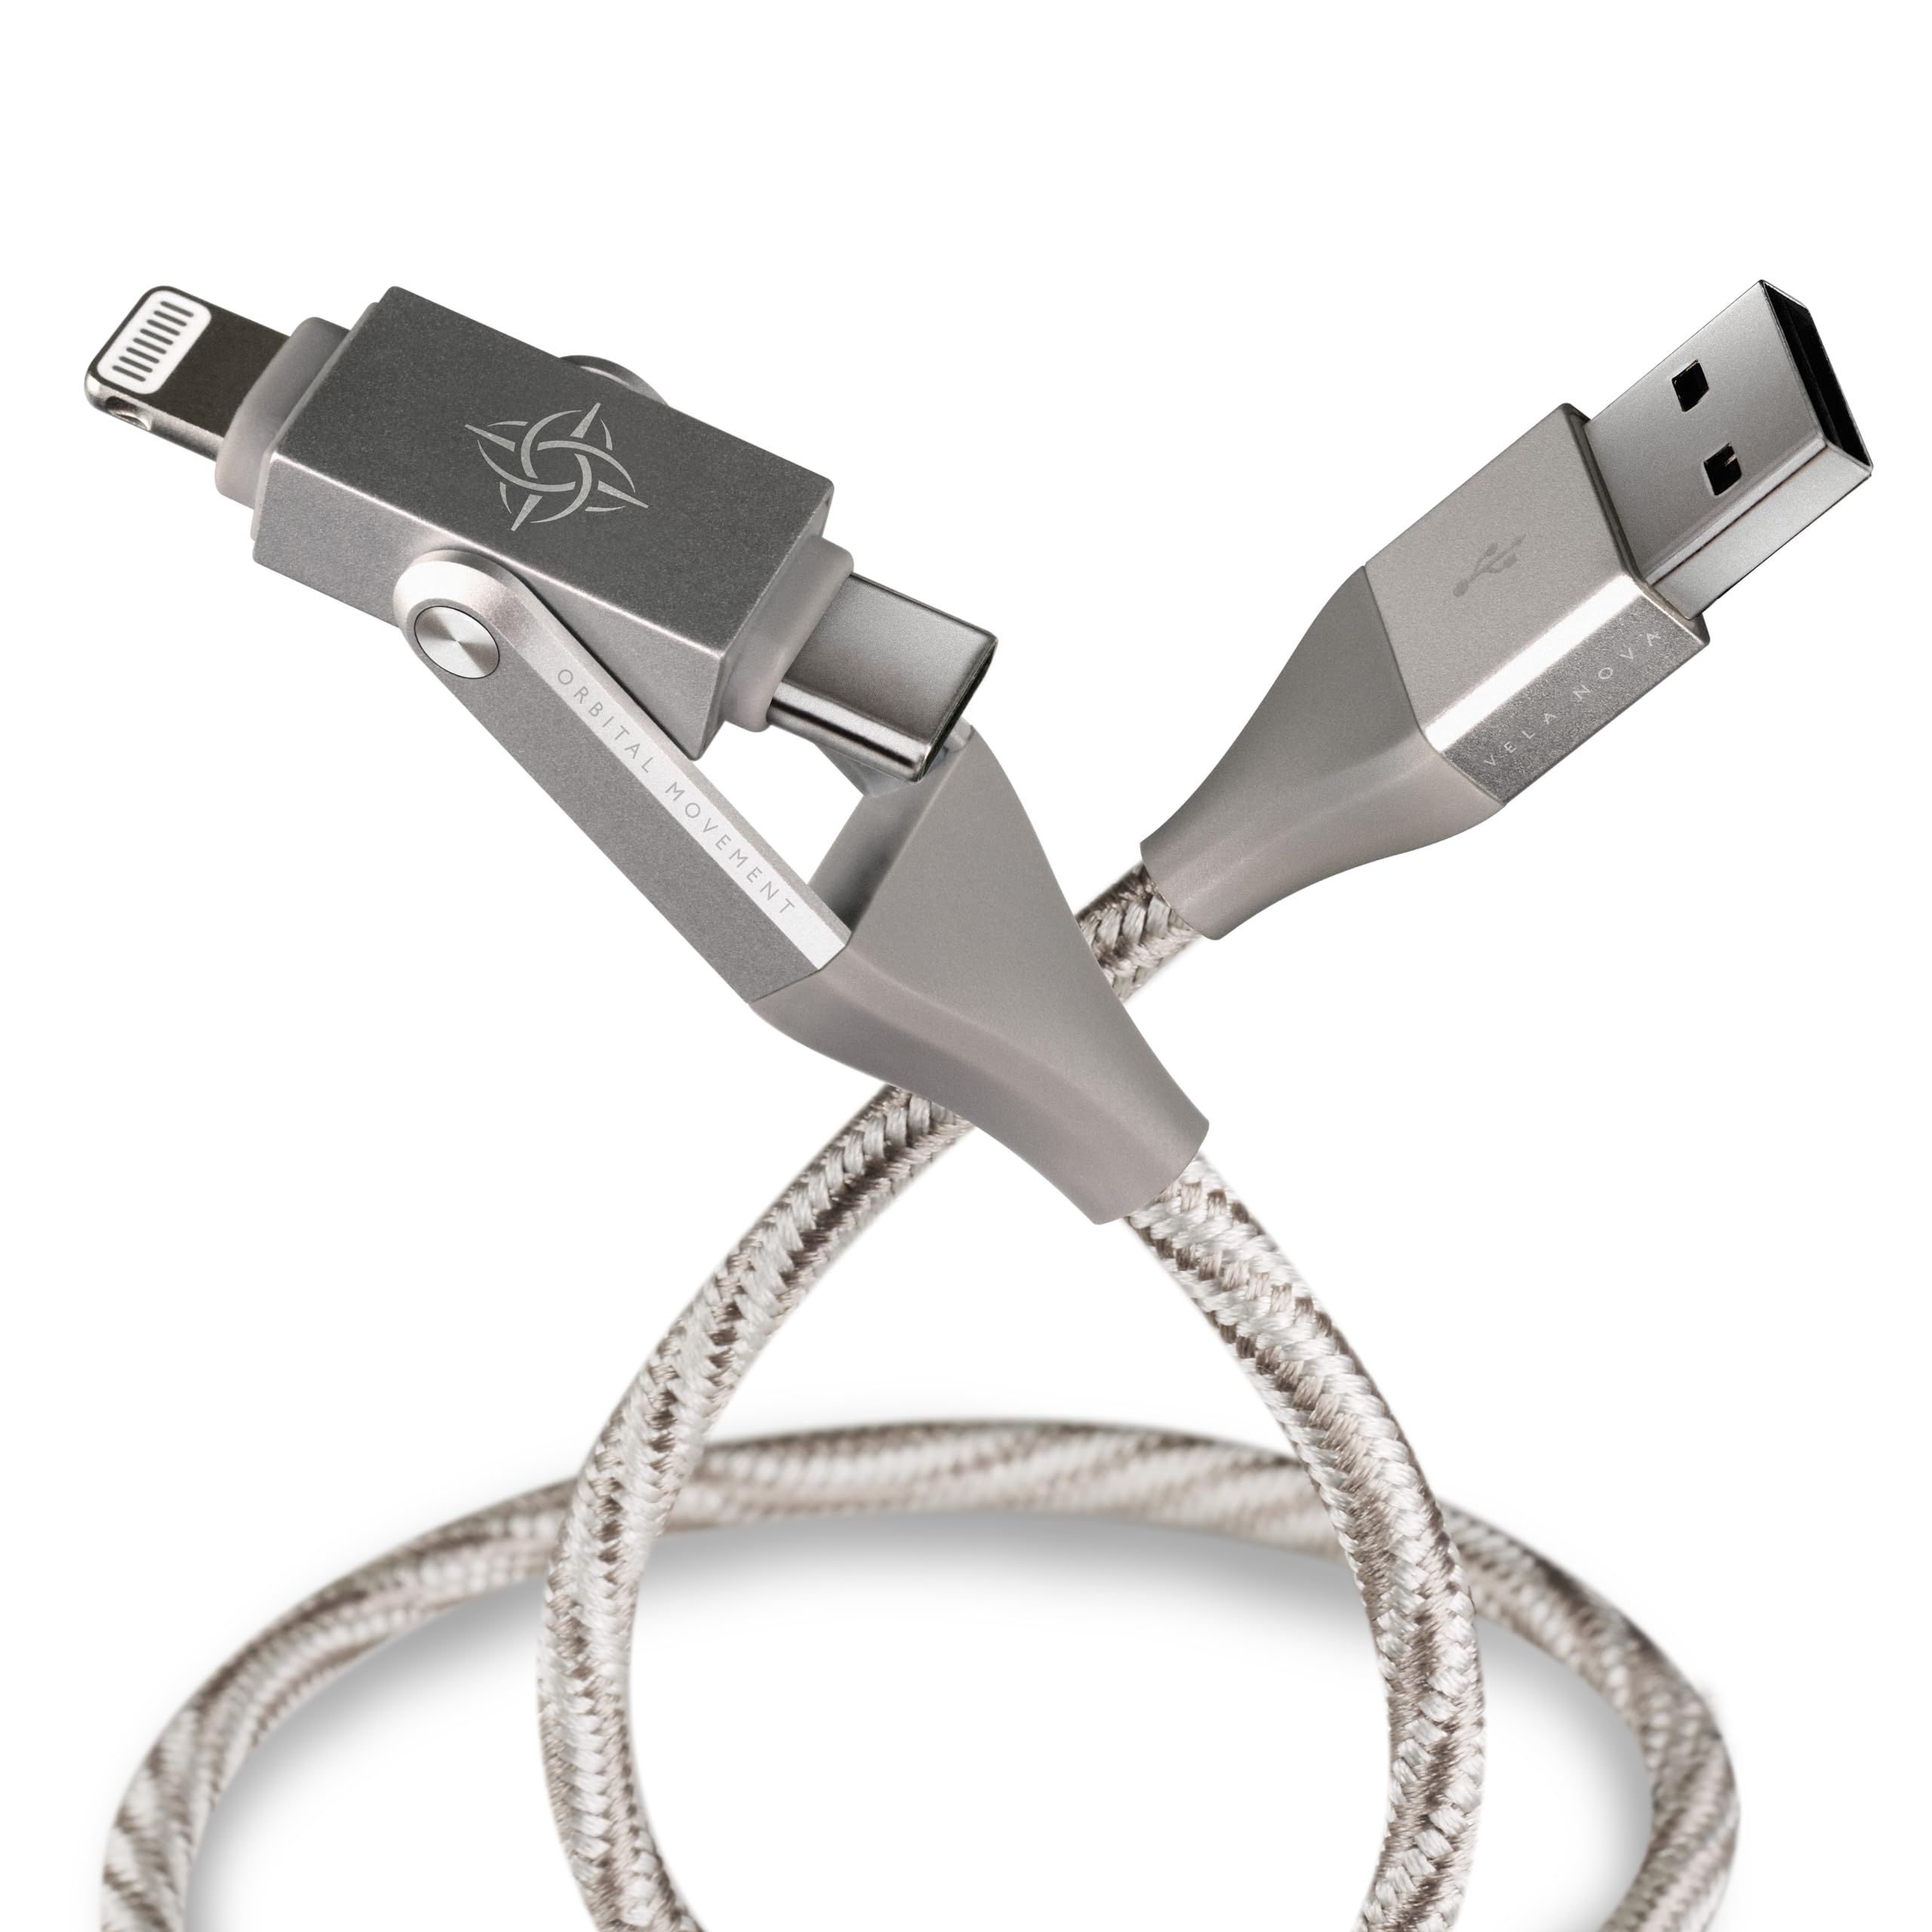 If you have access to another USB cable, preferably an Apple-certified one, try using it to connect the iPad to the computer.
Using a different cable can help determine if the issue is with the cable itself.